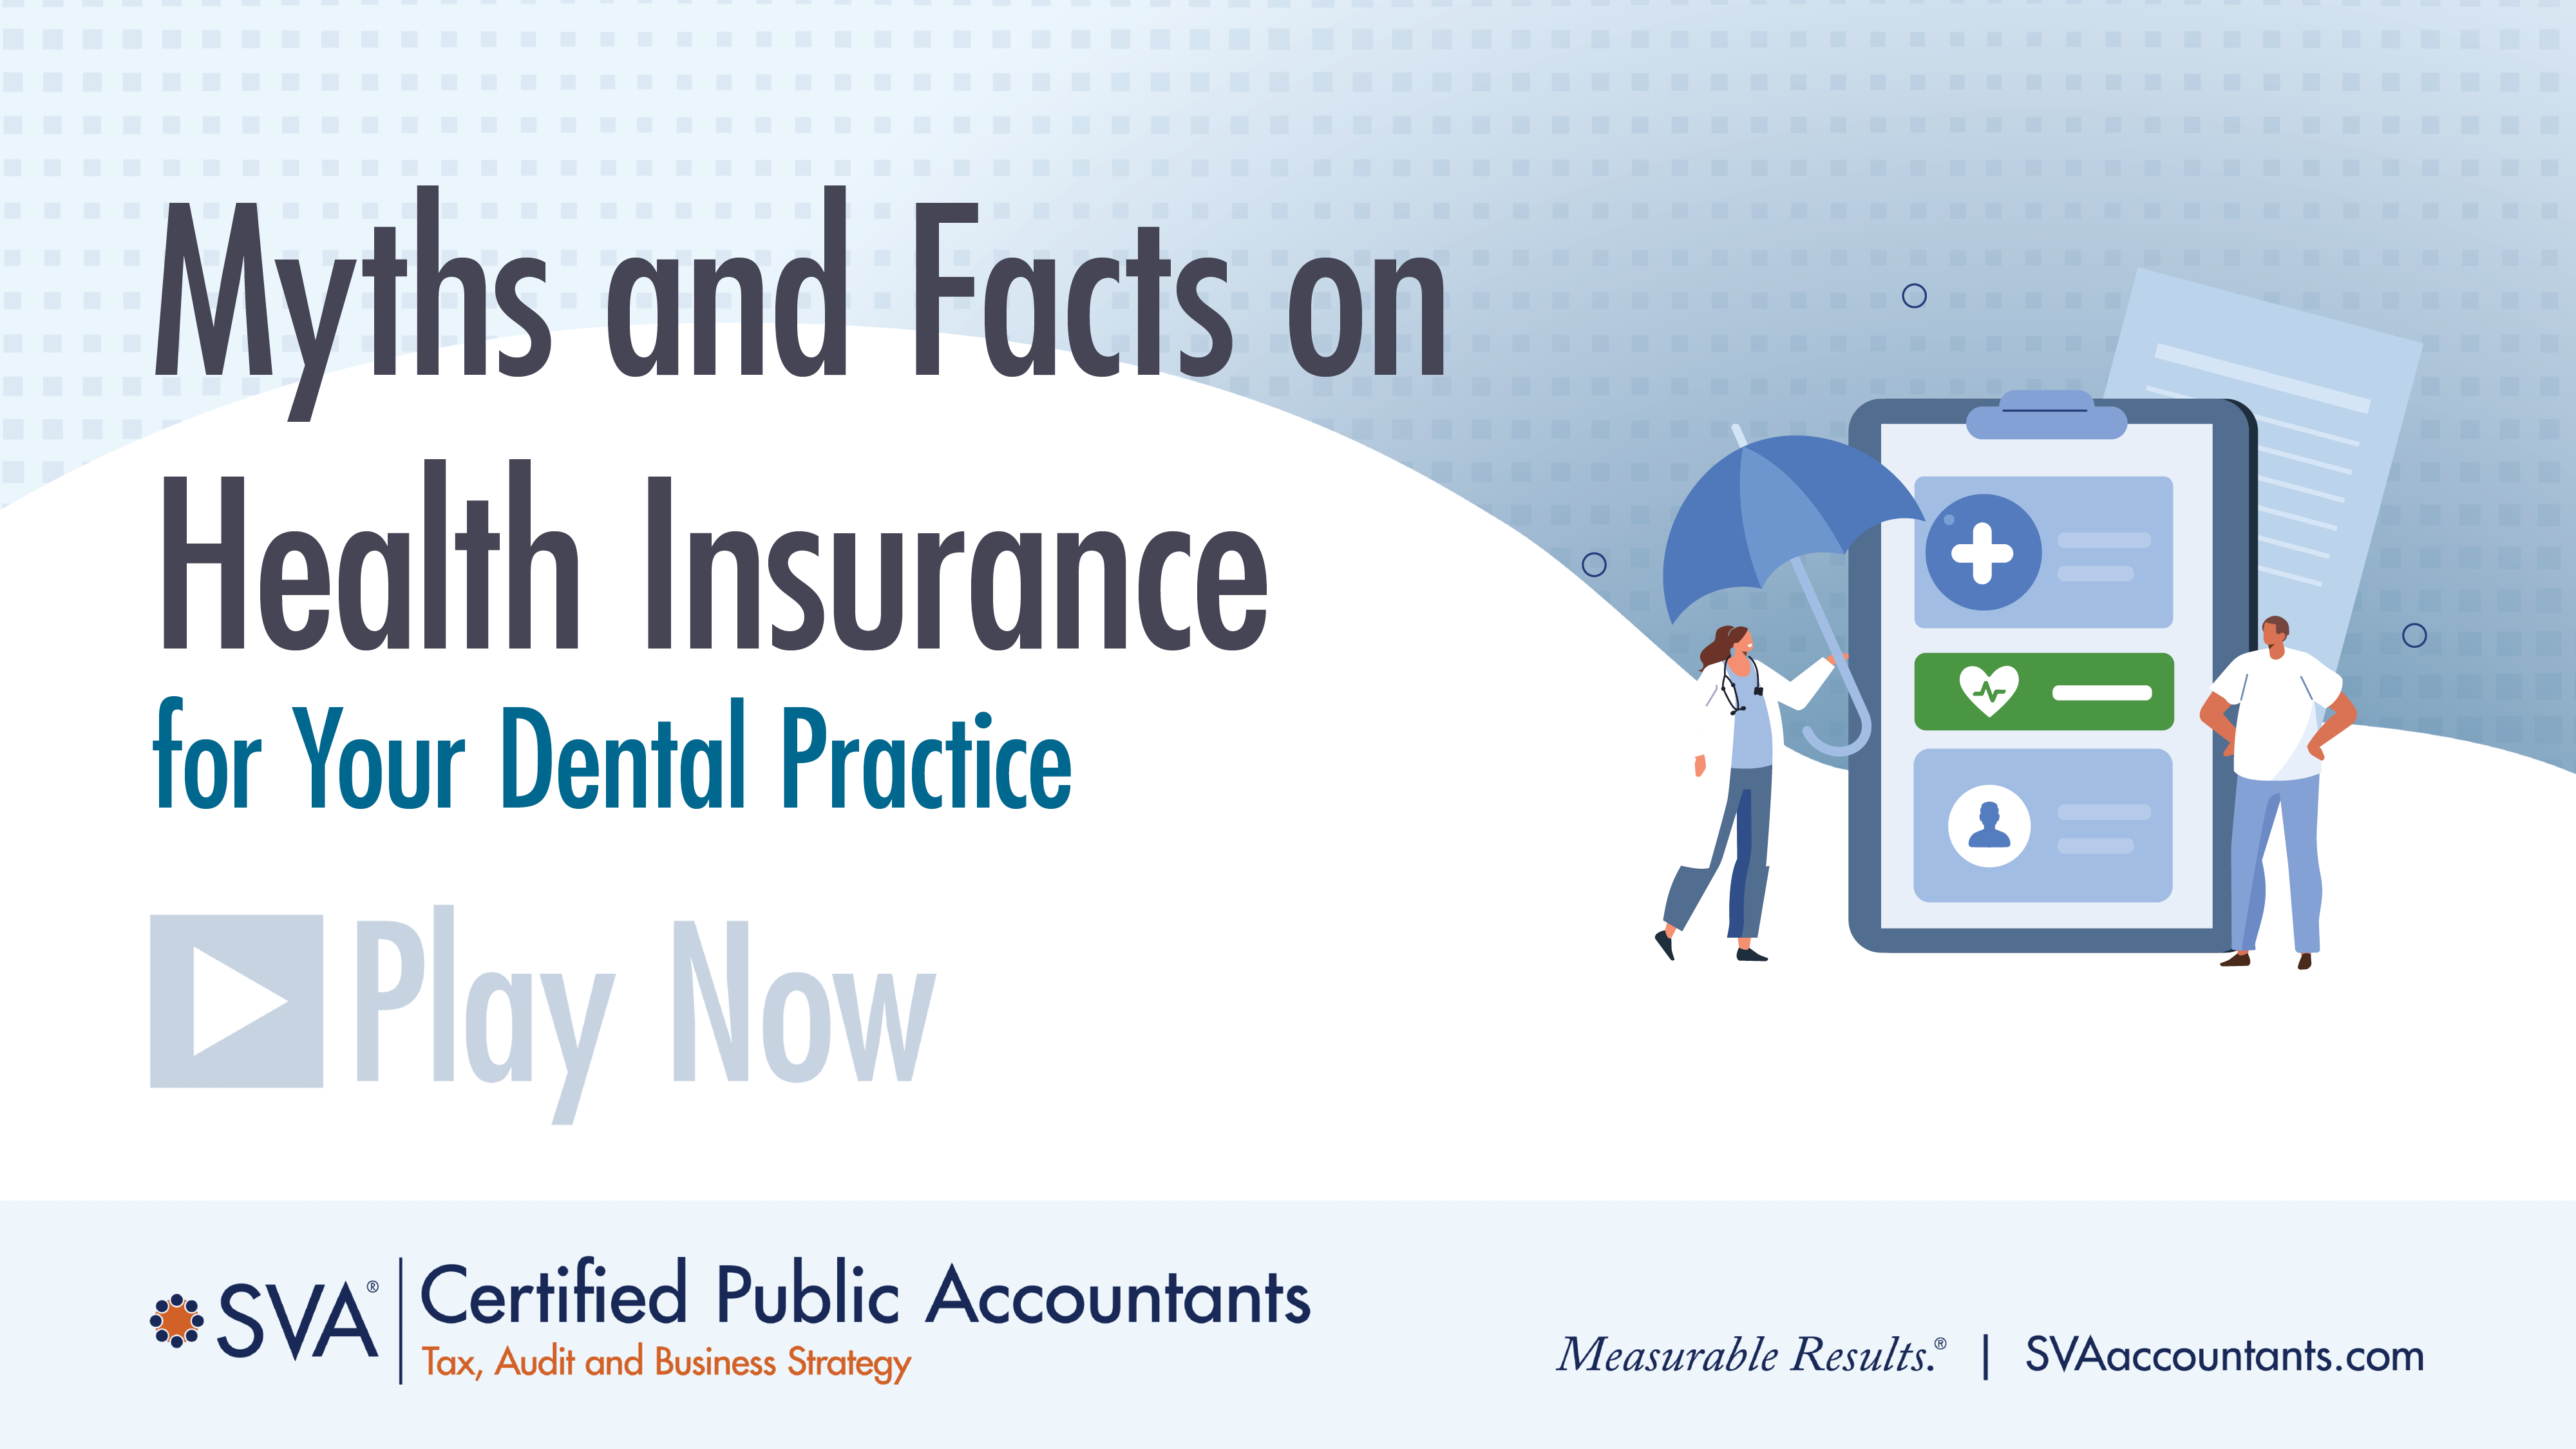 Myths and Facts on Health Insurance for Your Practice